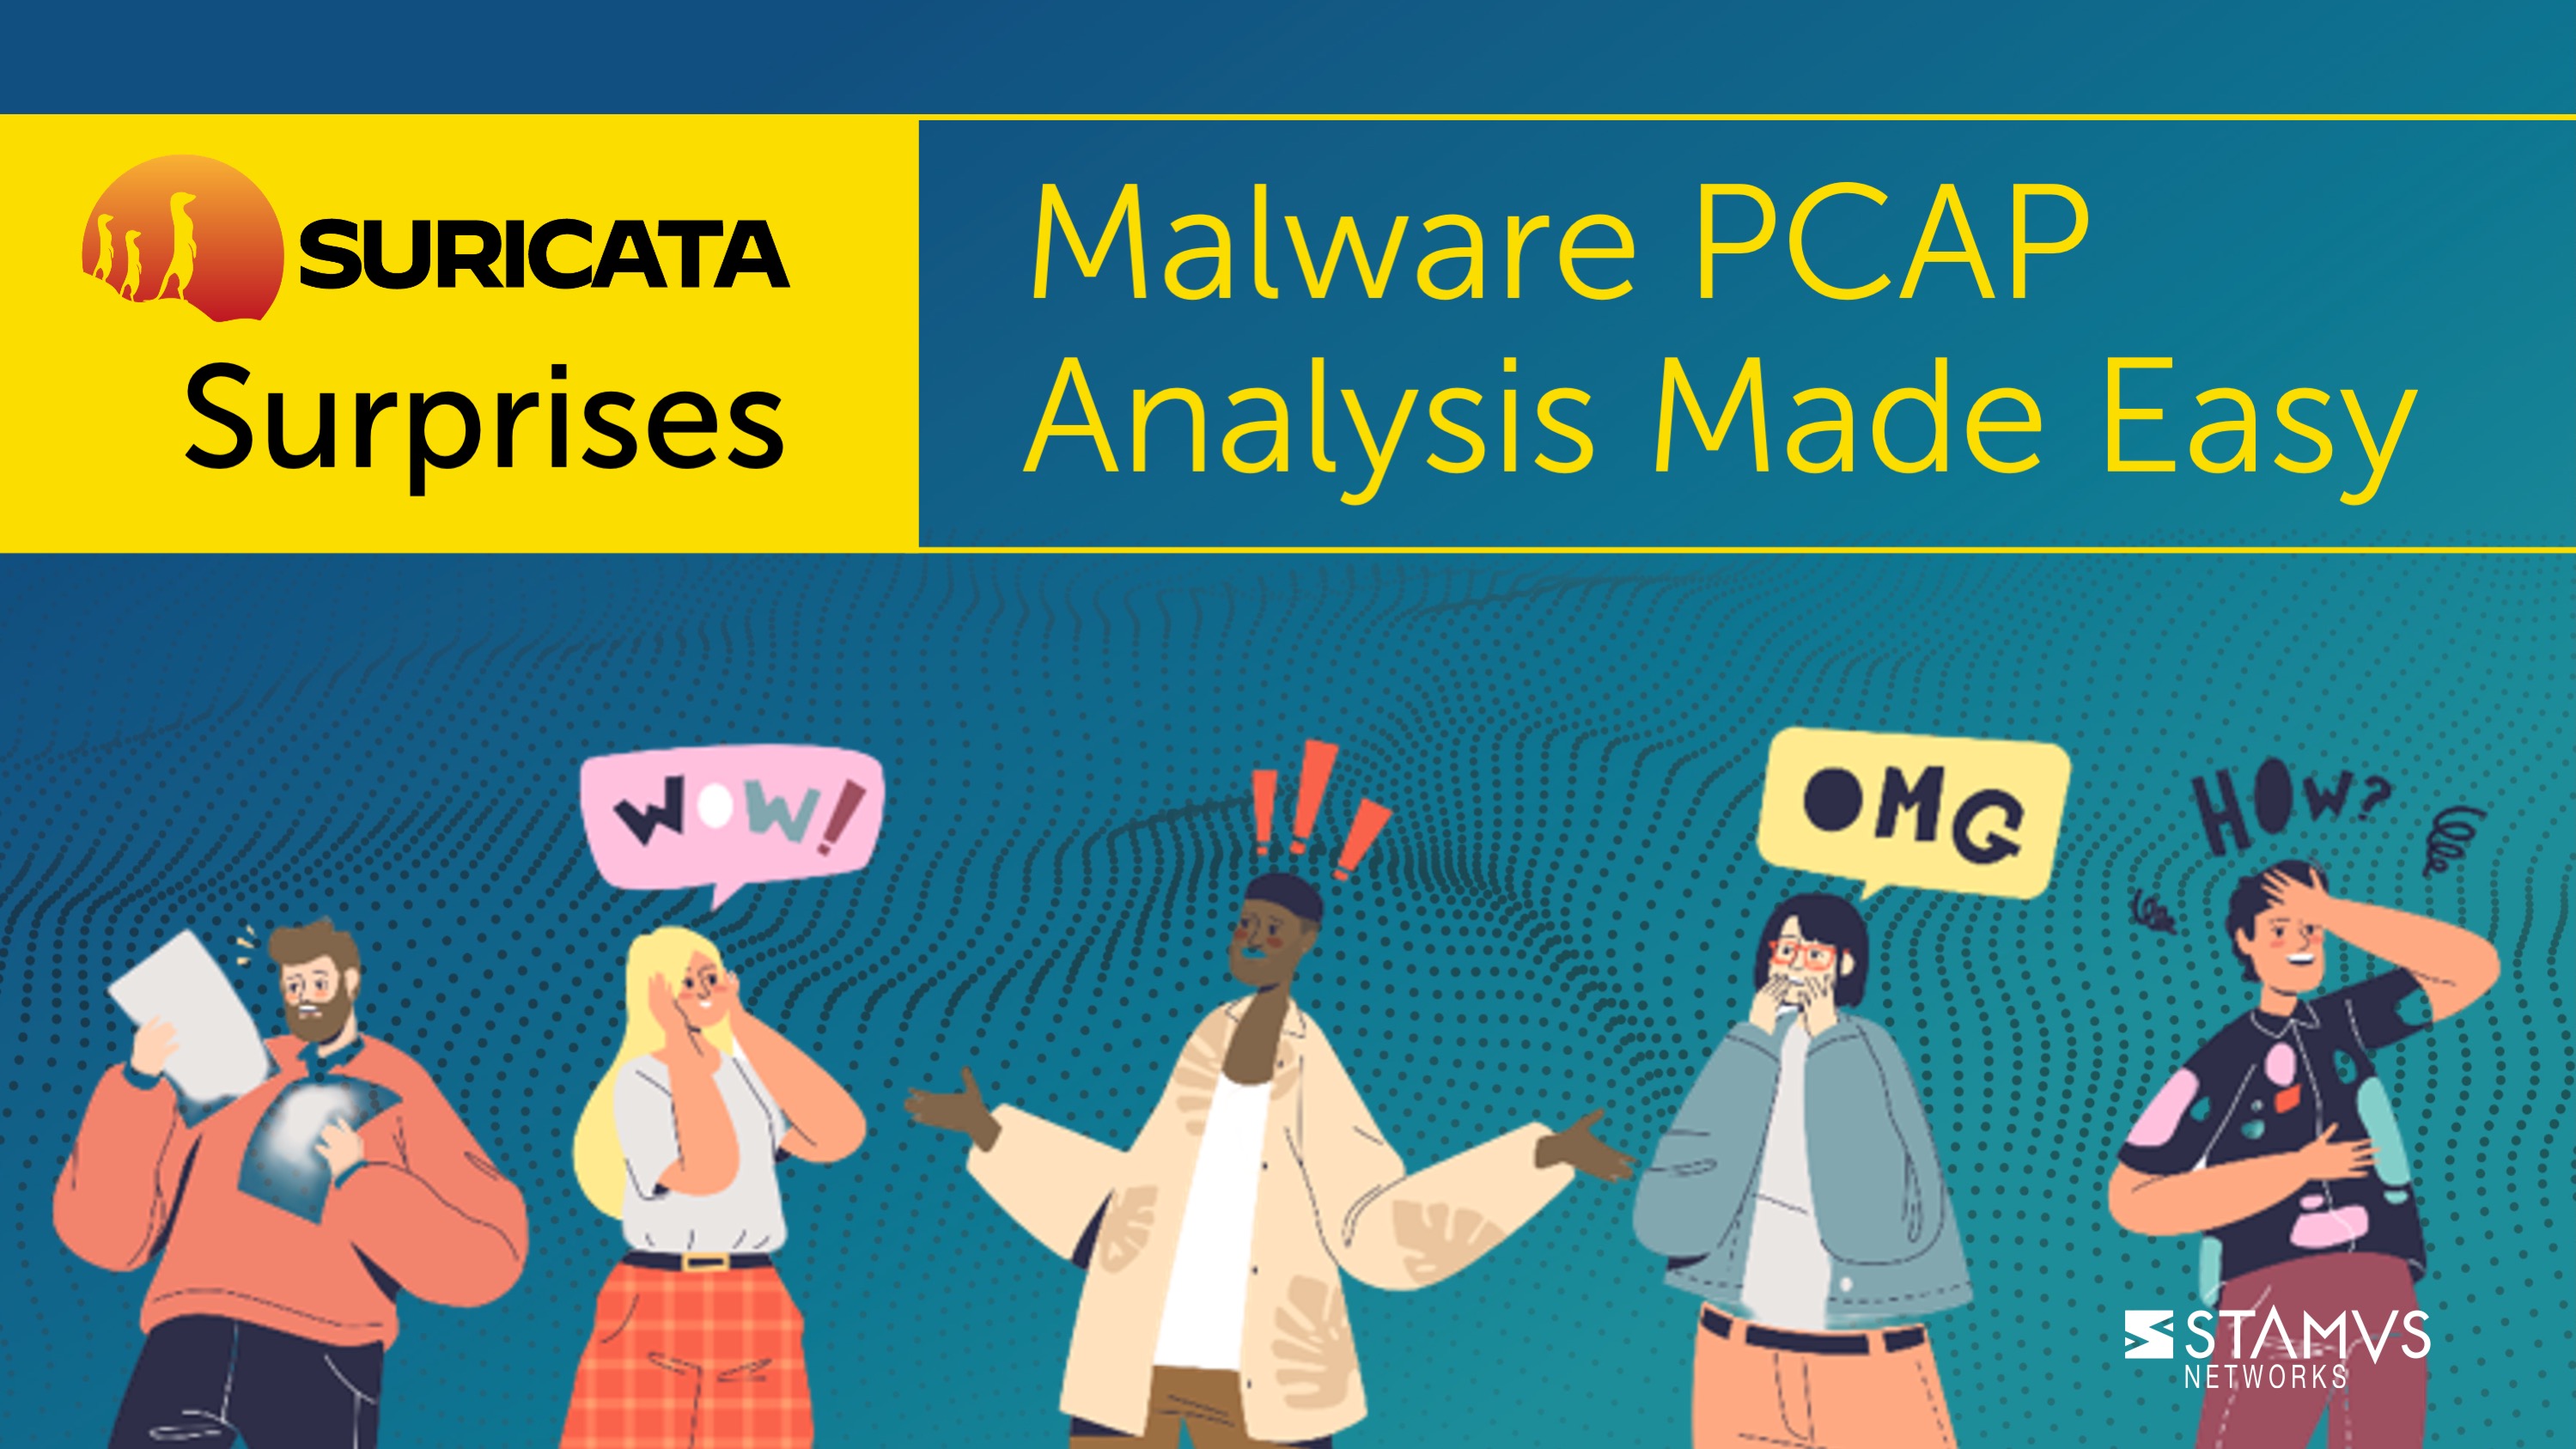 Malware PCAP Analysis Made Easy by Peter Manev